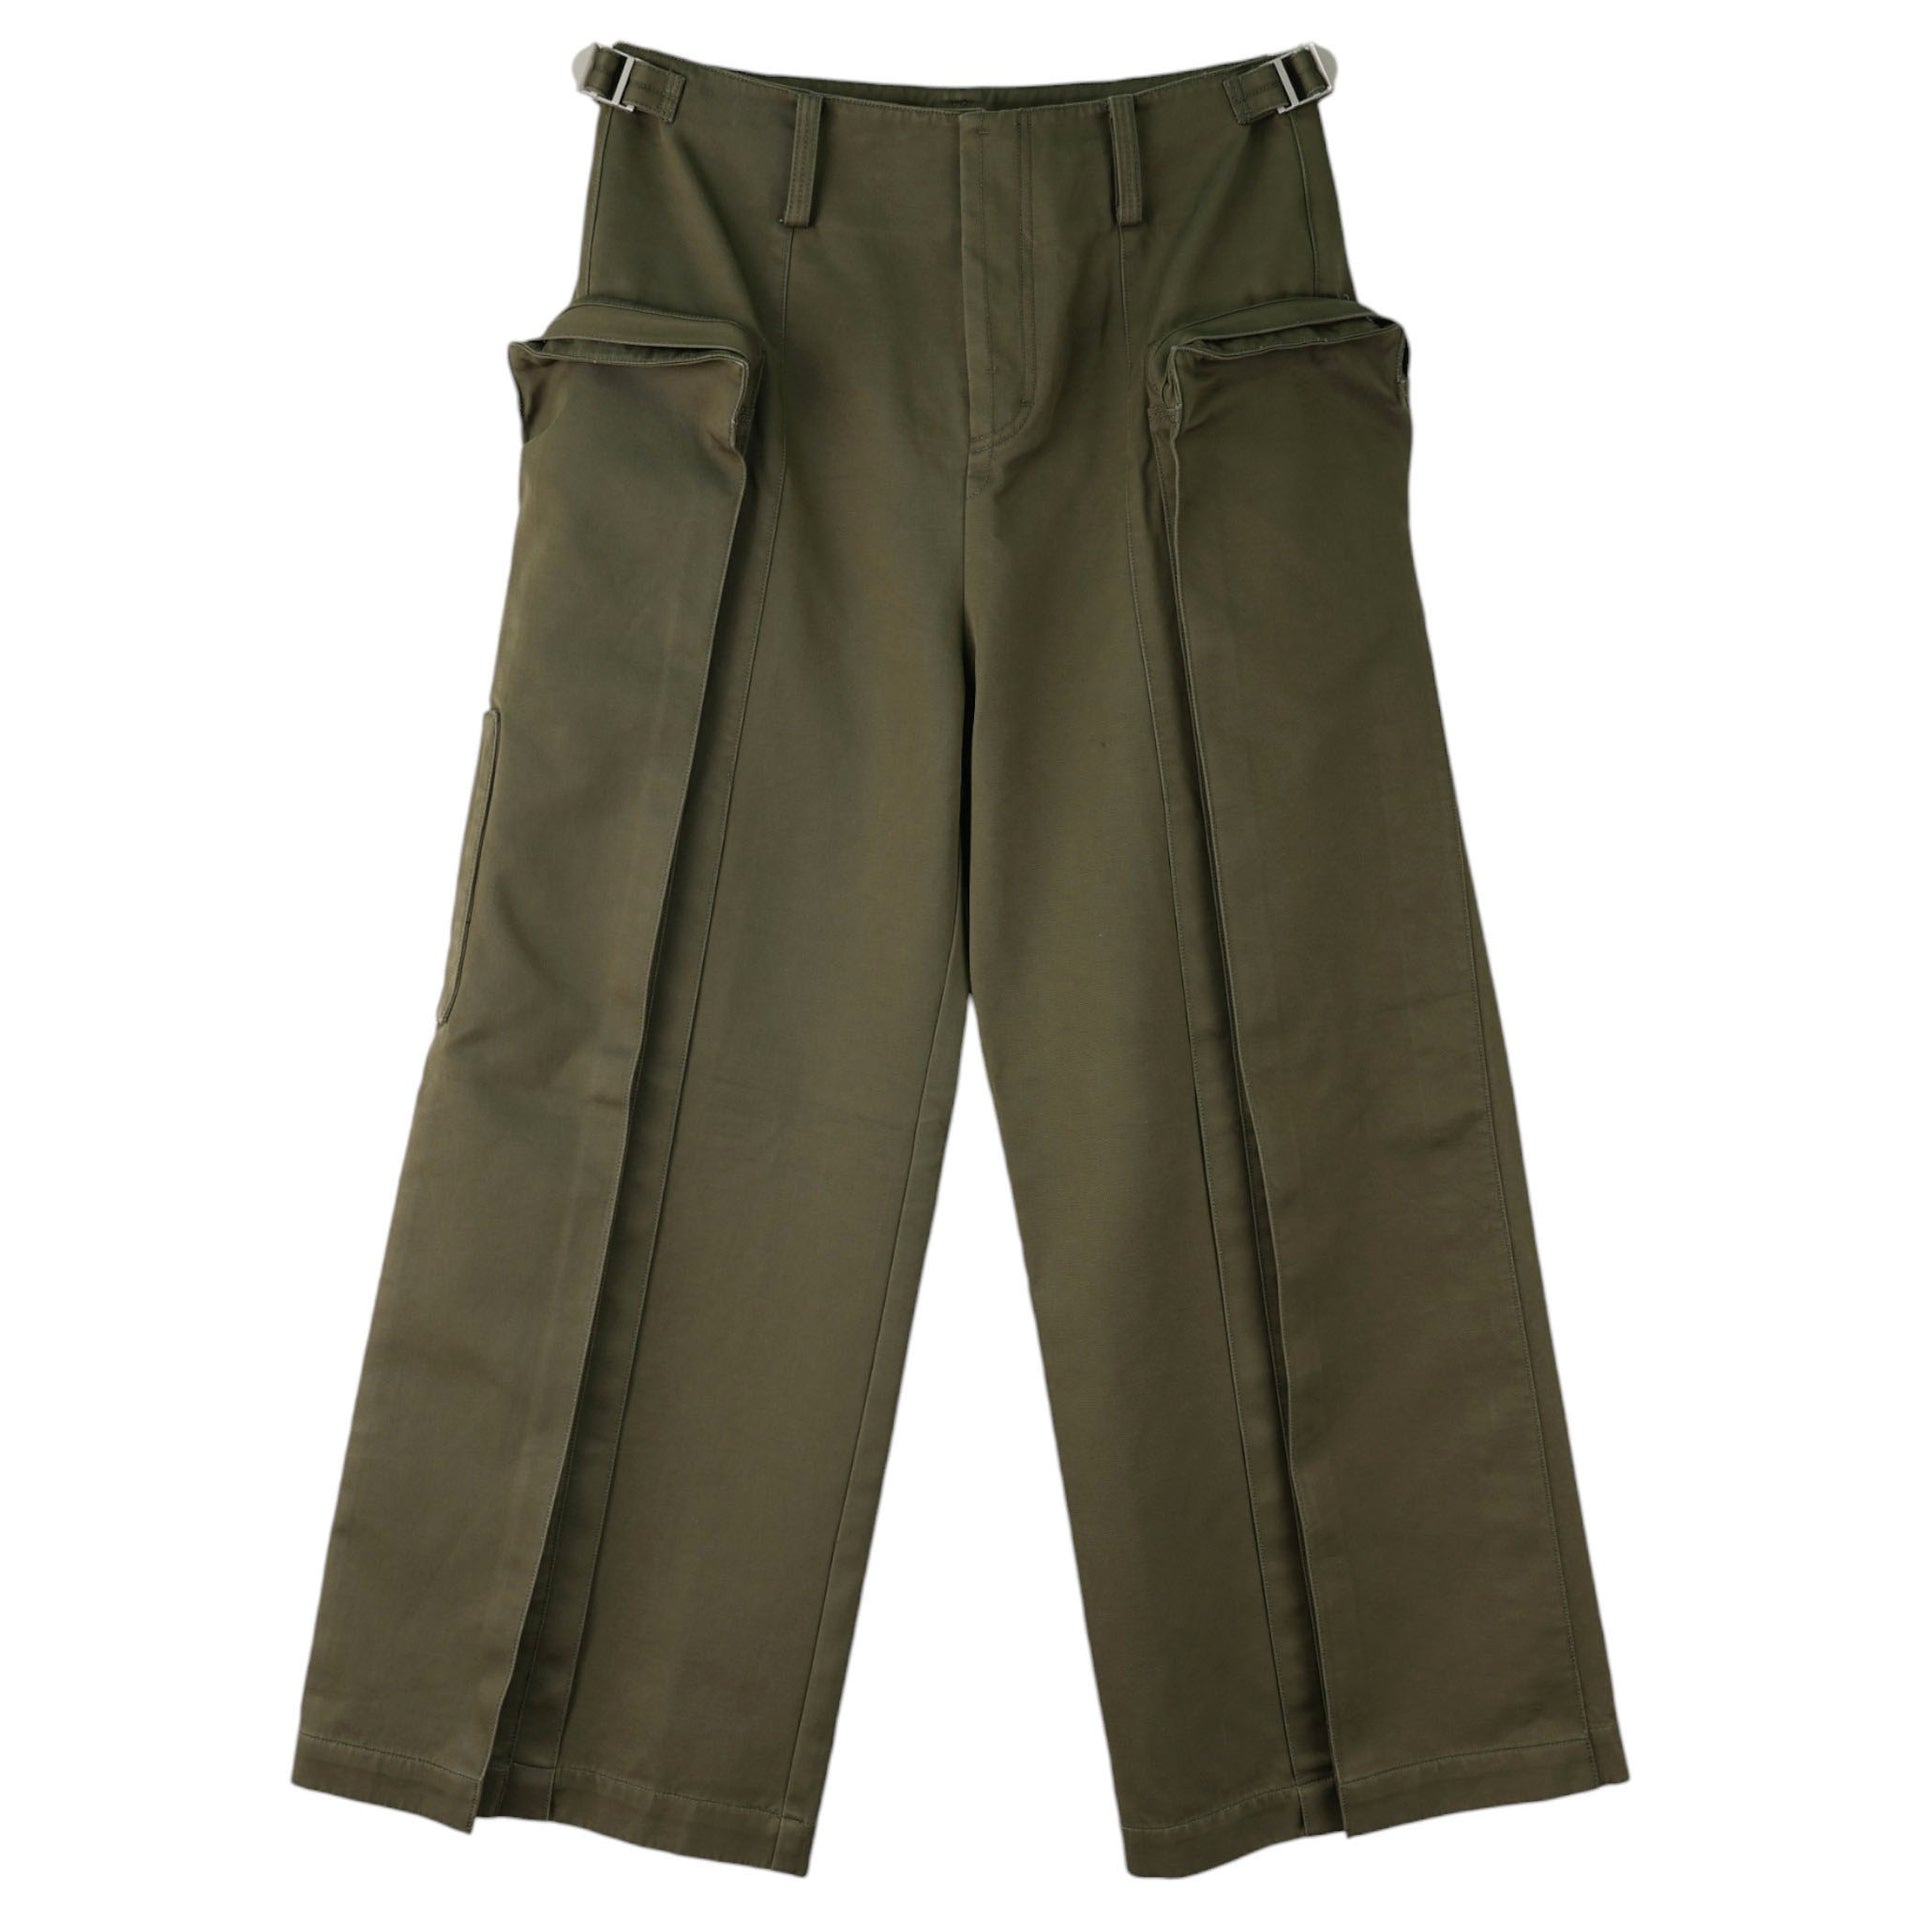 THE CARGO PANTS / OLIVE